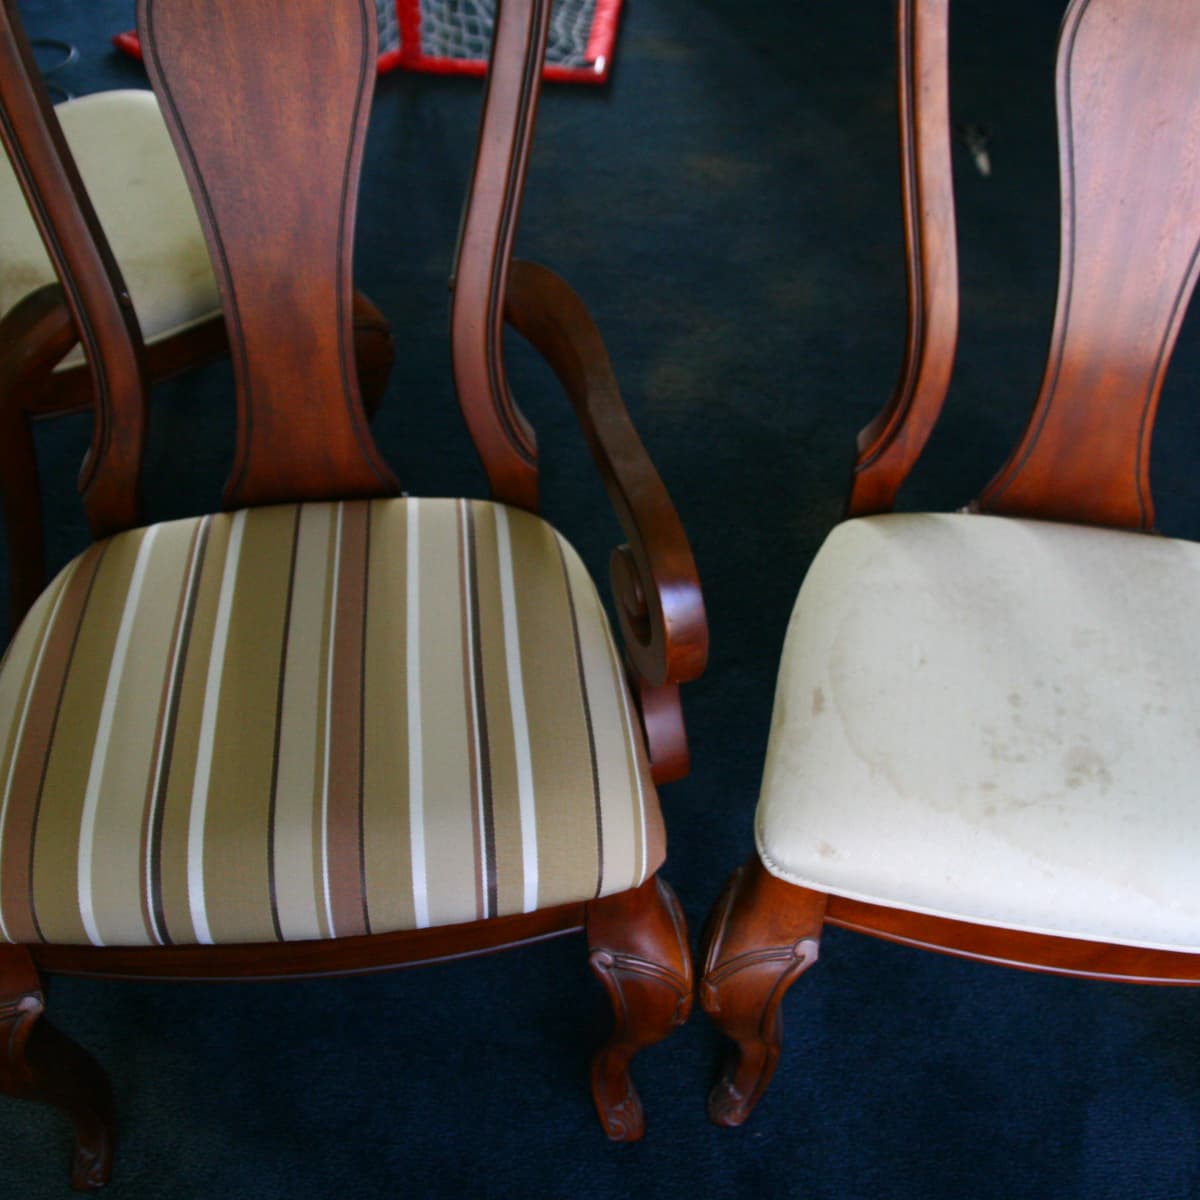 How To Reupholster A Dining Room Chair, How Much Does It Cost To Reupholster A Dining Chair Uk